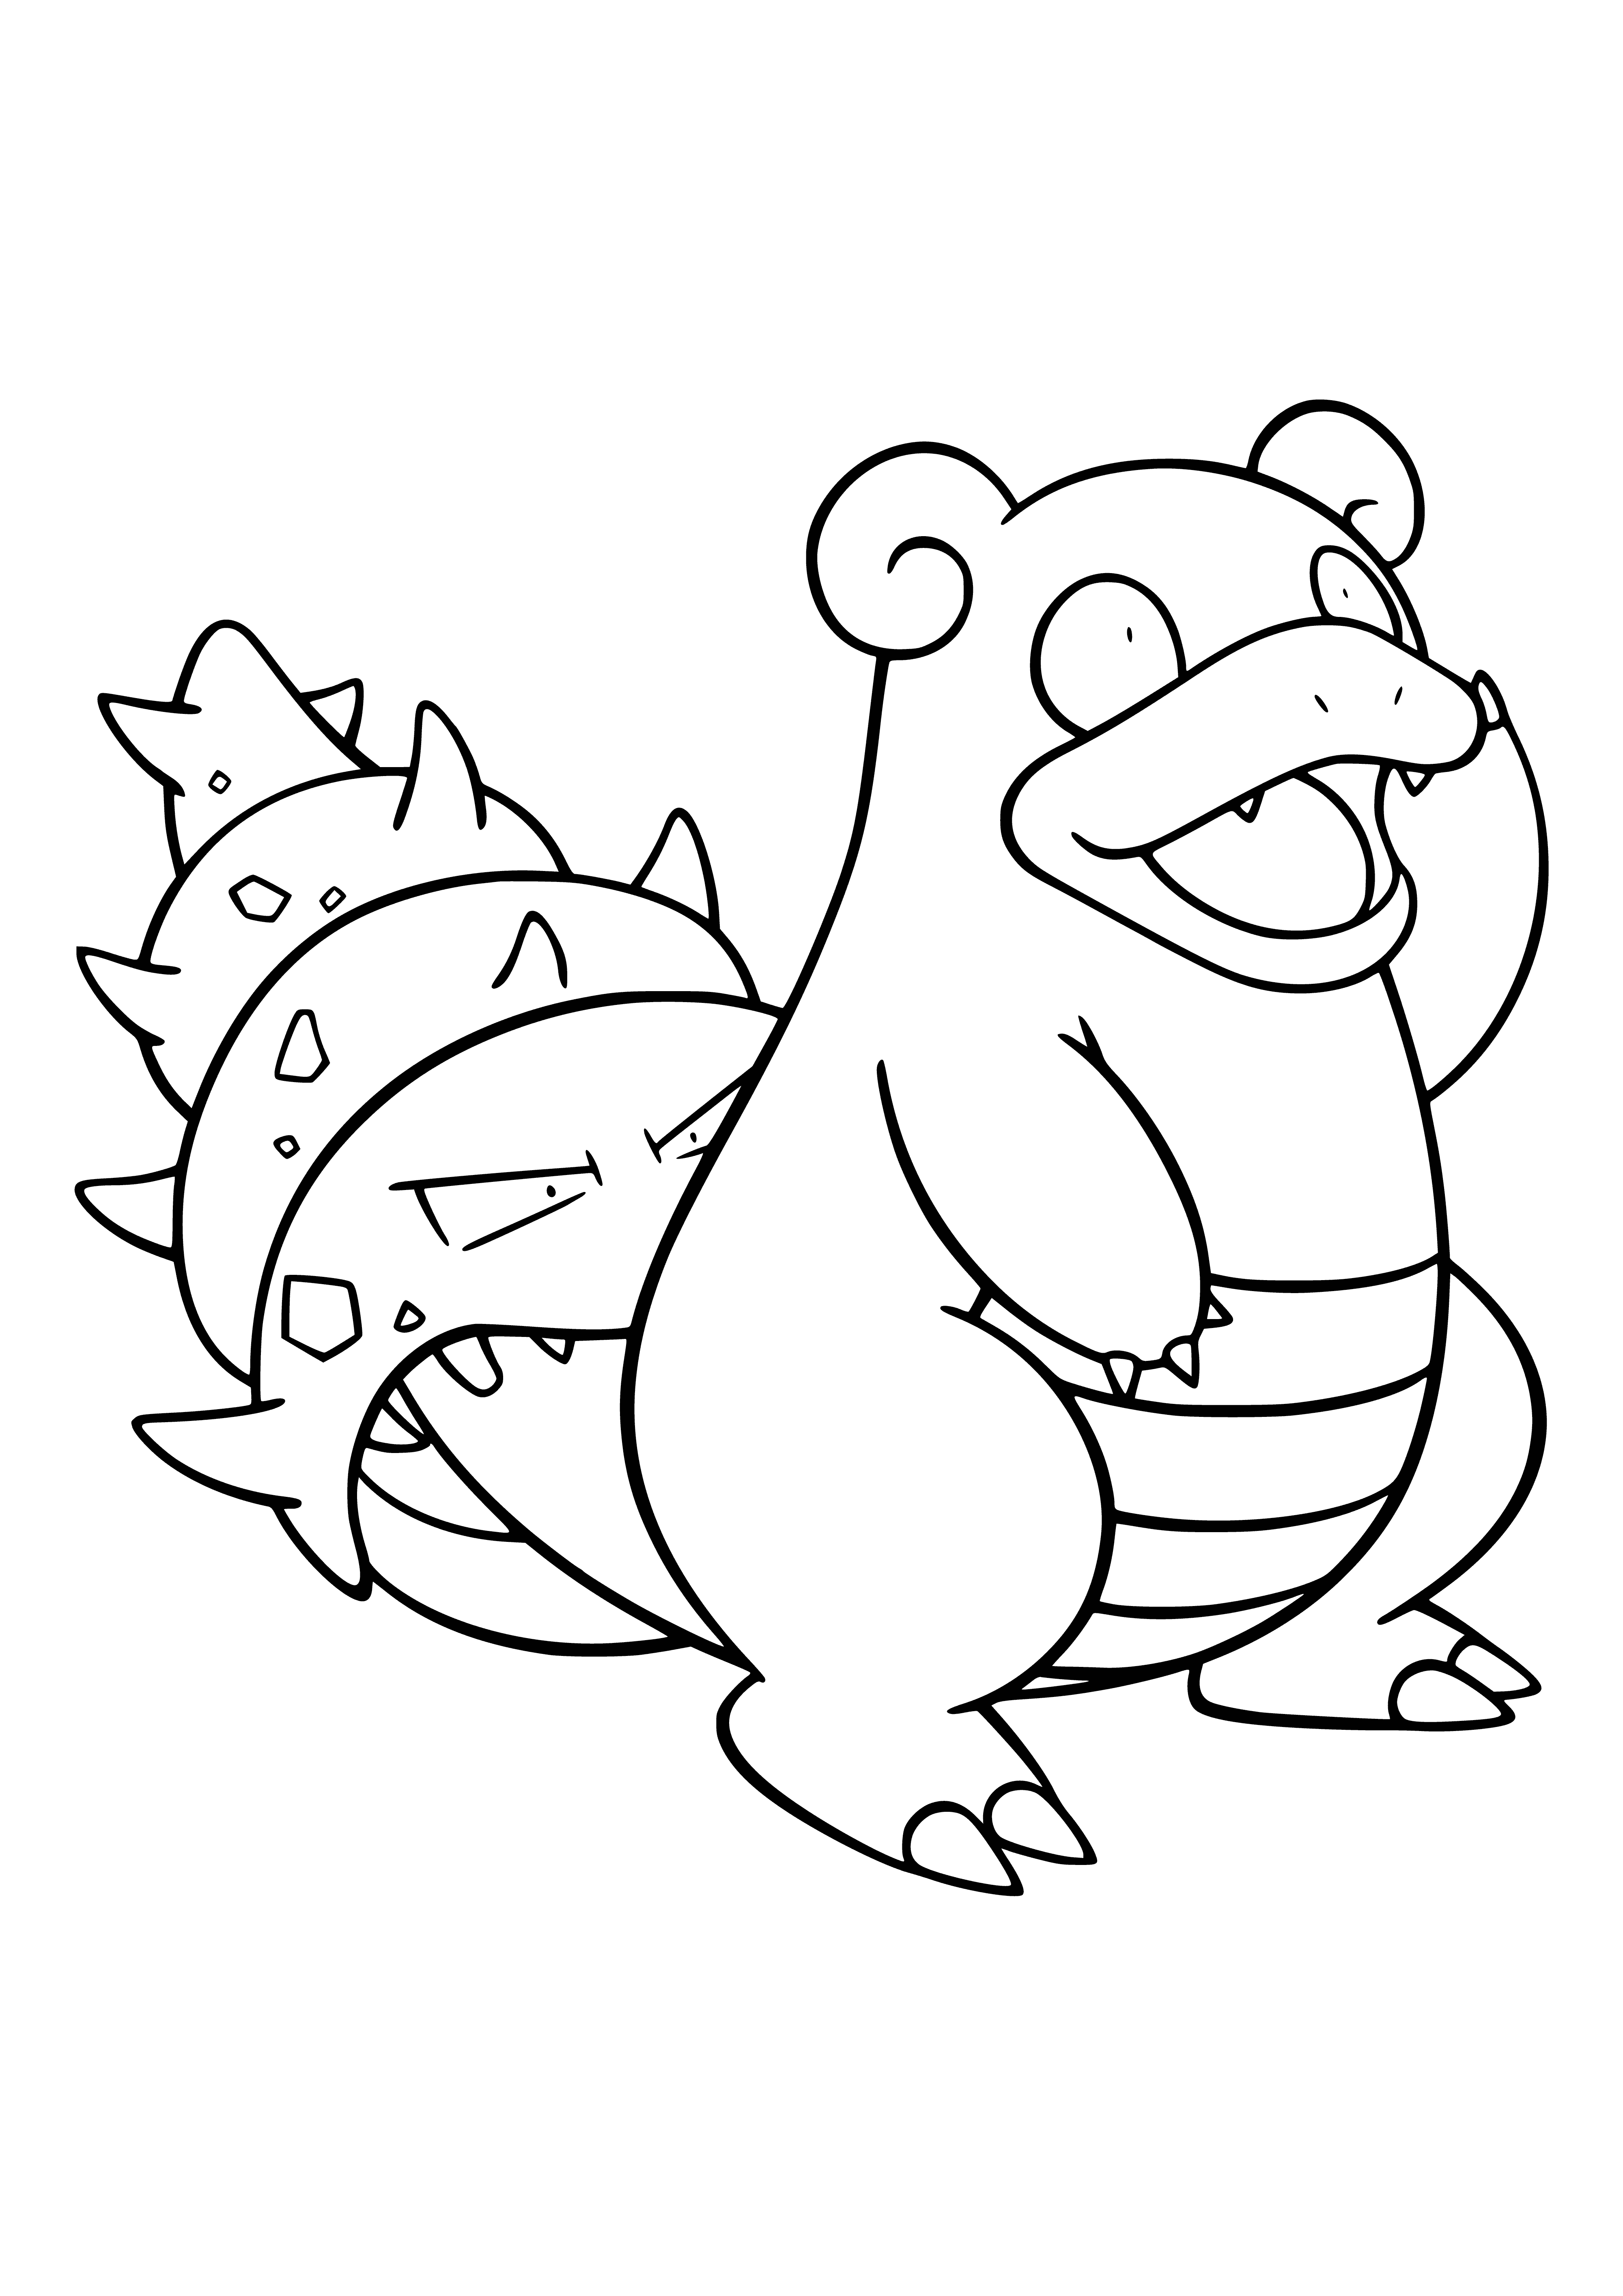 coloring page: A dolphin-like Pokémon with a blue and white body and large pink flower on its head plus a small pink tail.